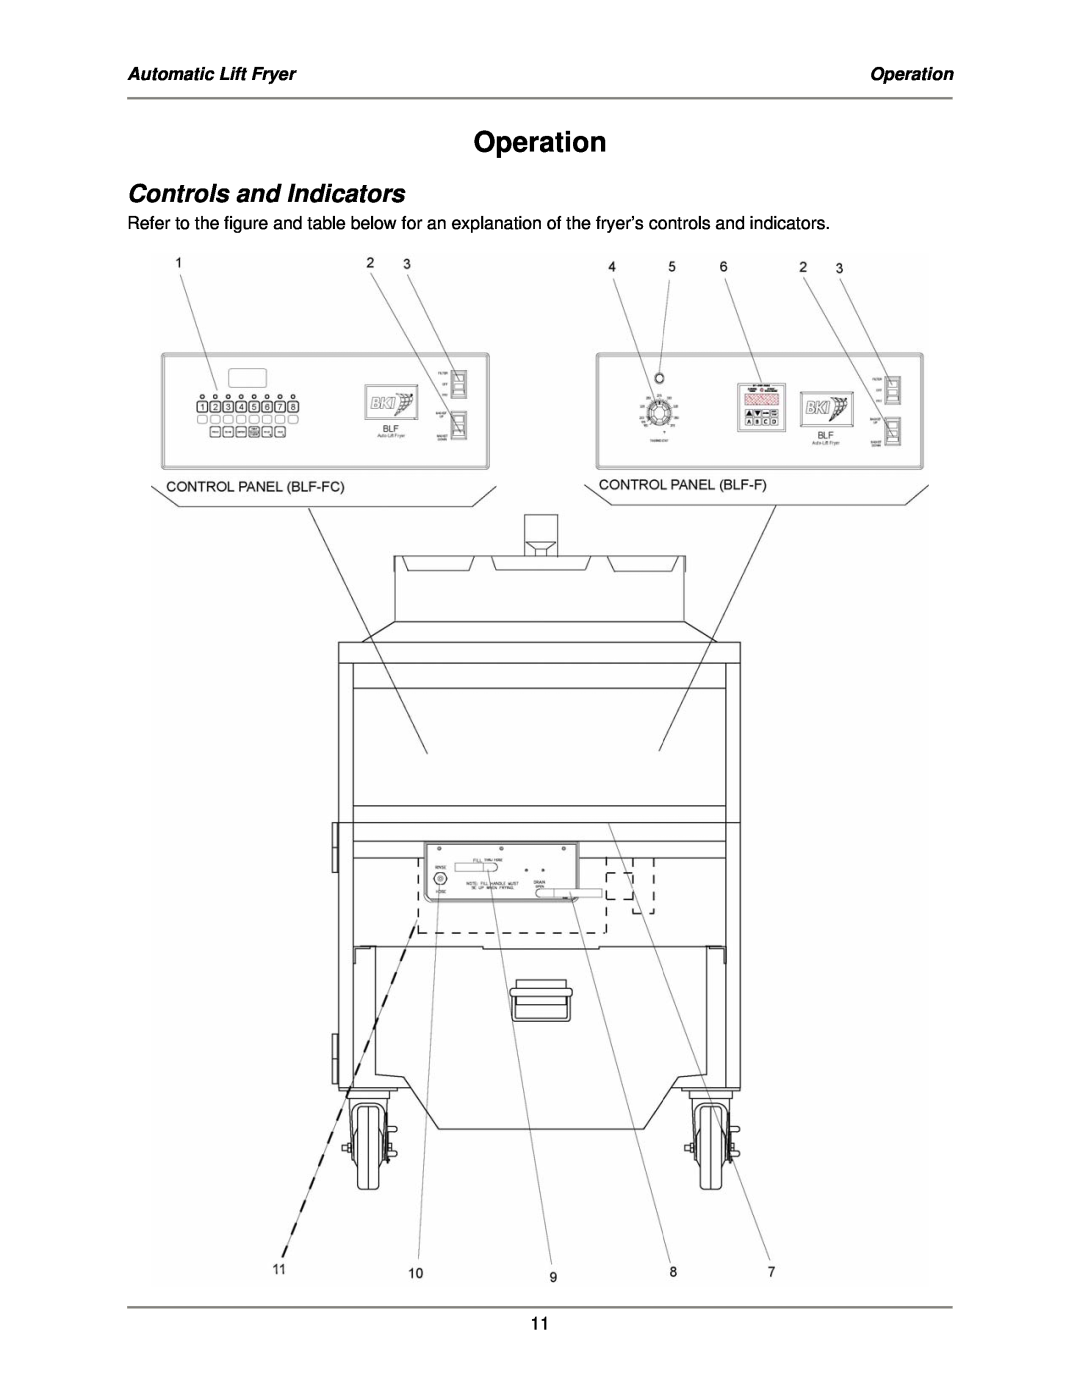 Bakers Pride Oven BLF-FC operation manual Operation, Controls and Indicators, Automatic Lift Fryer 